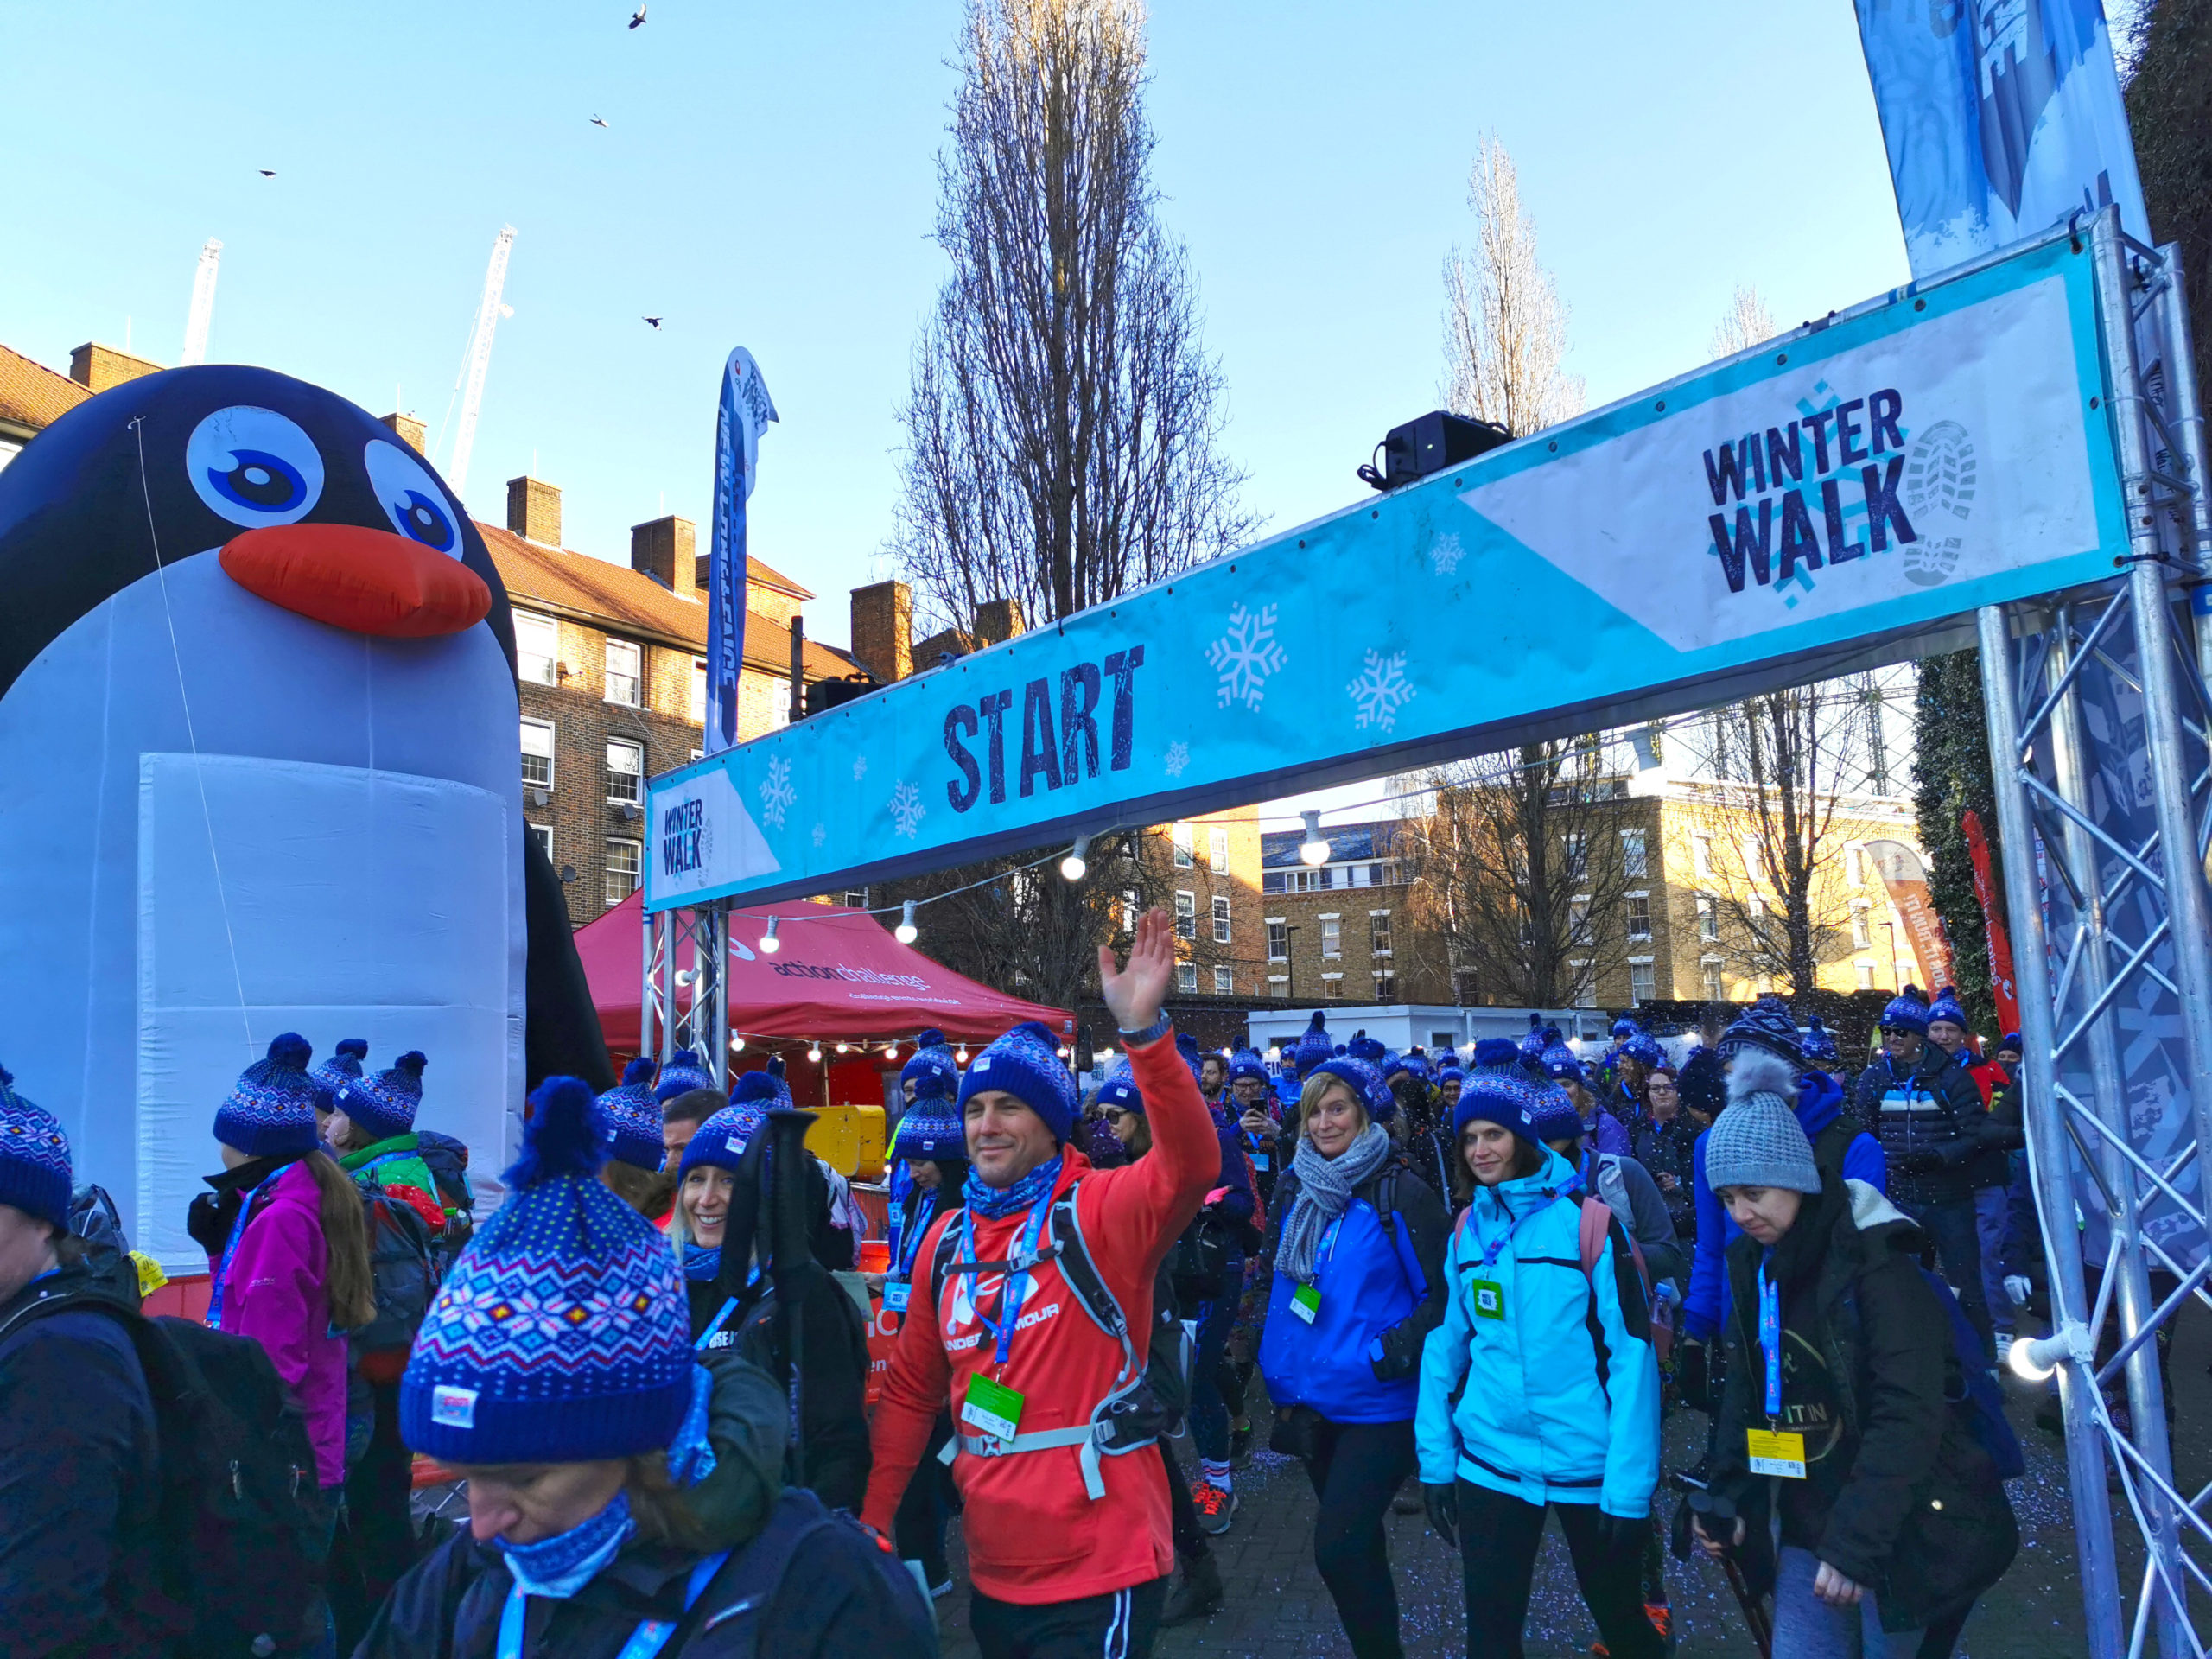 A Record Breaking London Winter Walk Raises Over £400,000 For Charity!